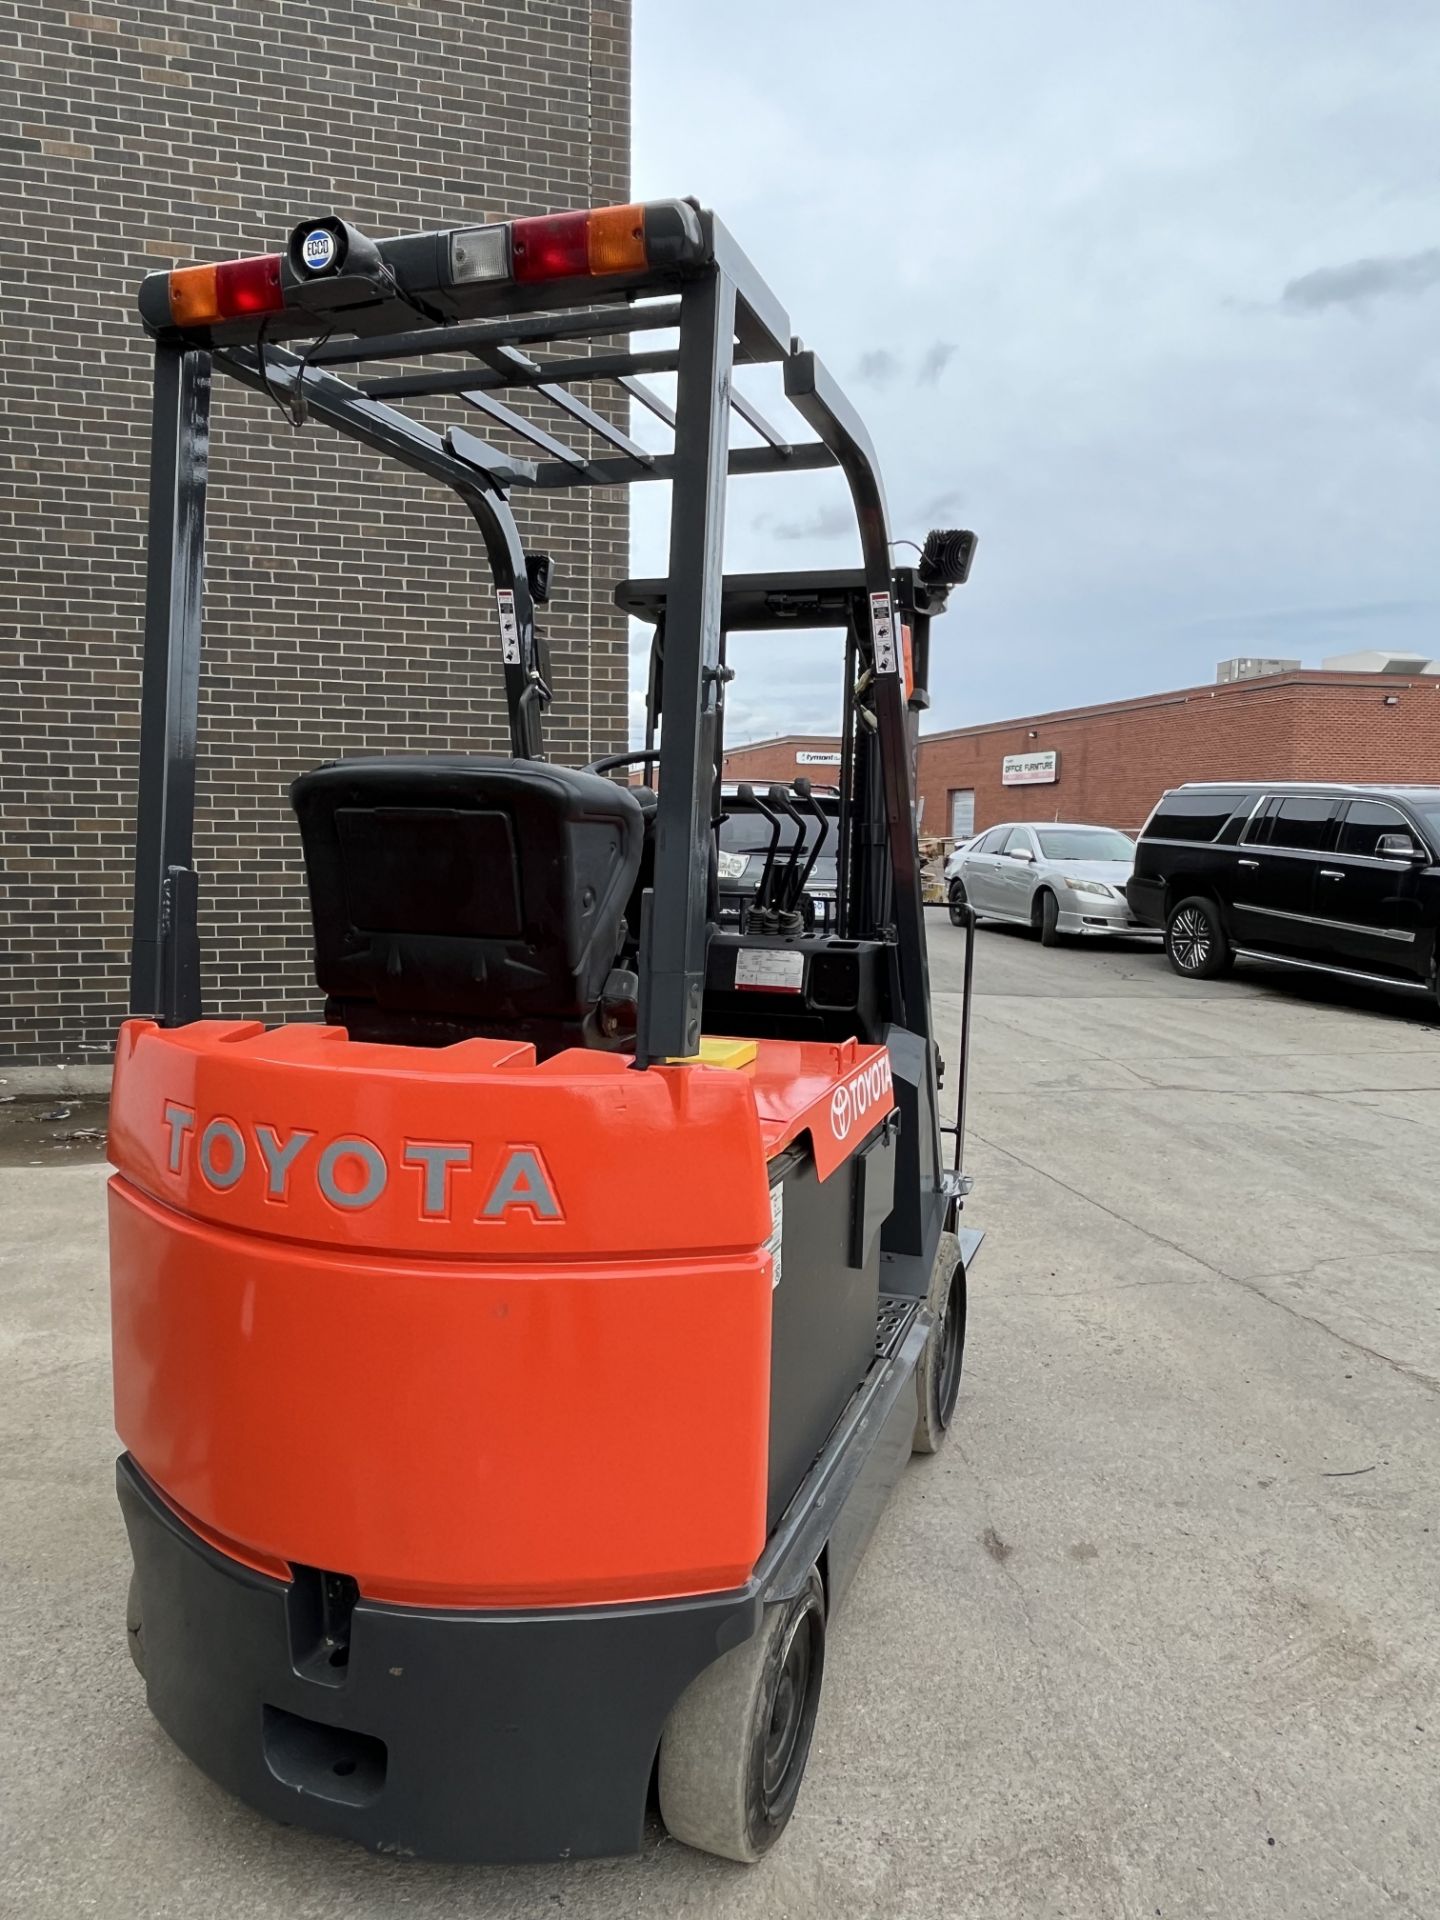 TOYOTA 5000 LBS CAP ELECTRIC FORKLIFT 3 STAGE MODEL#7FBCU25 - Image 3 of 6